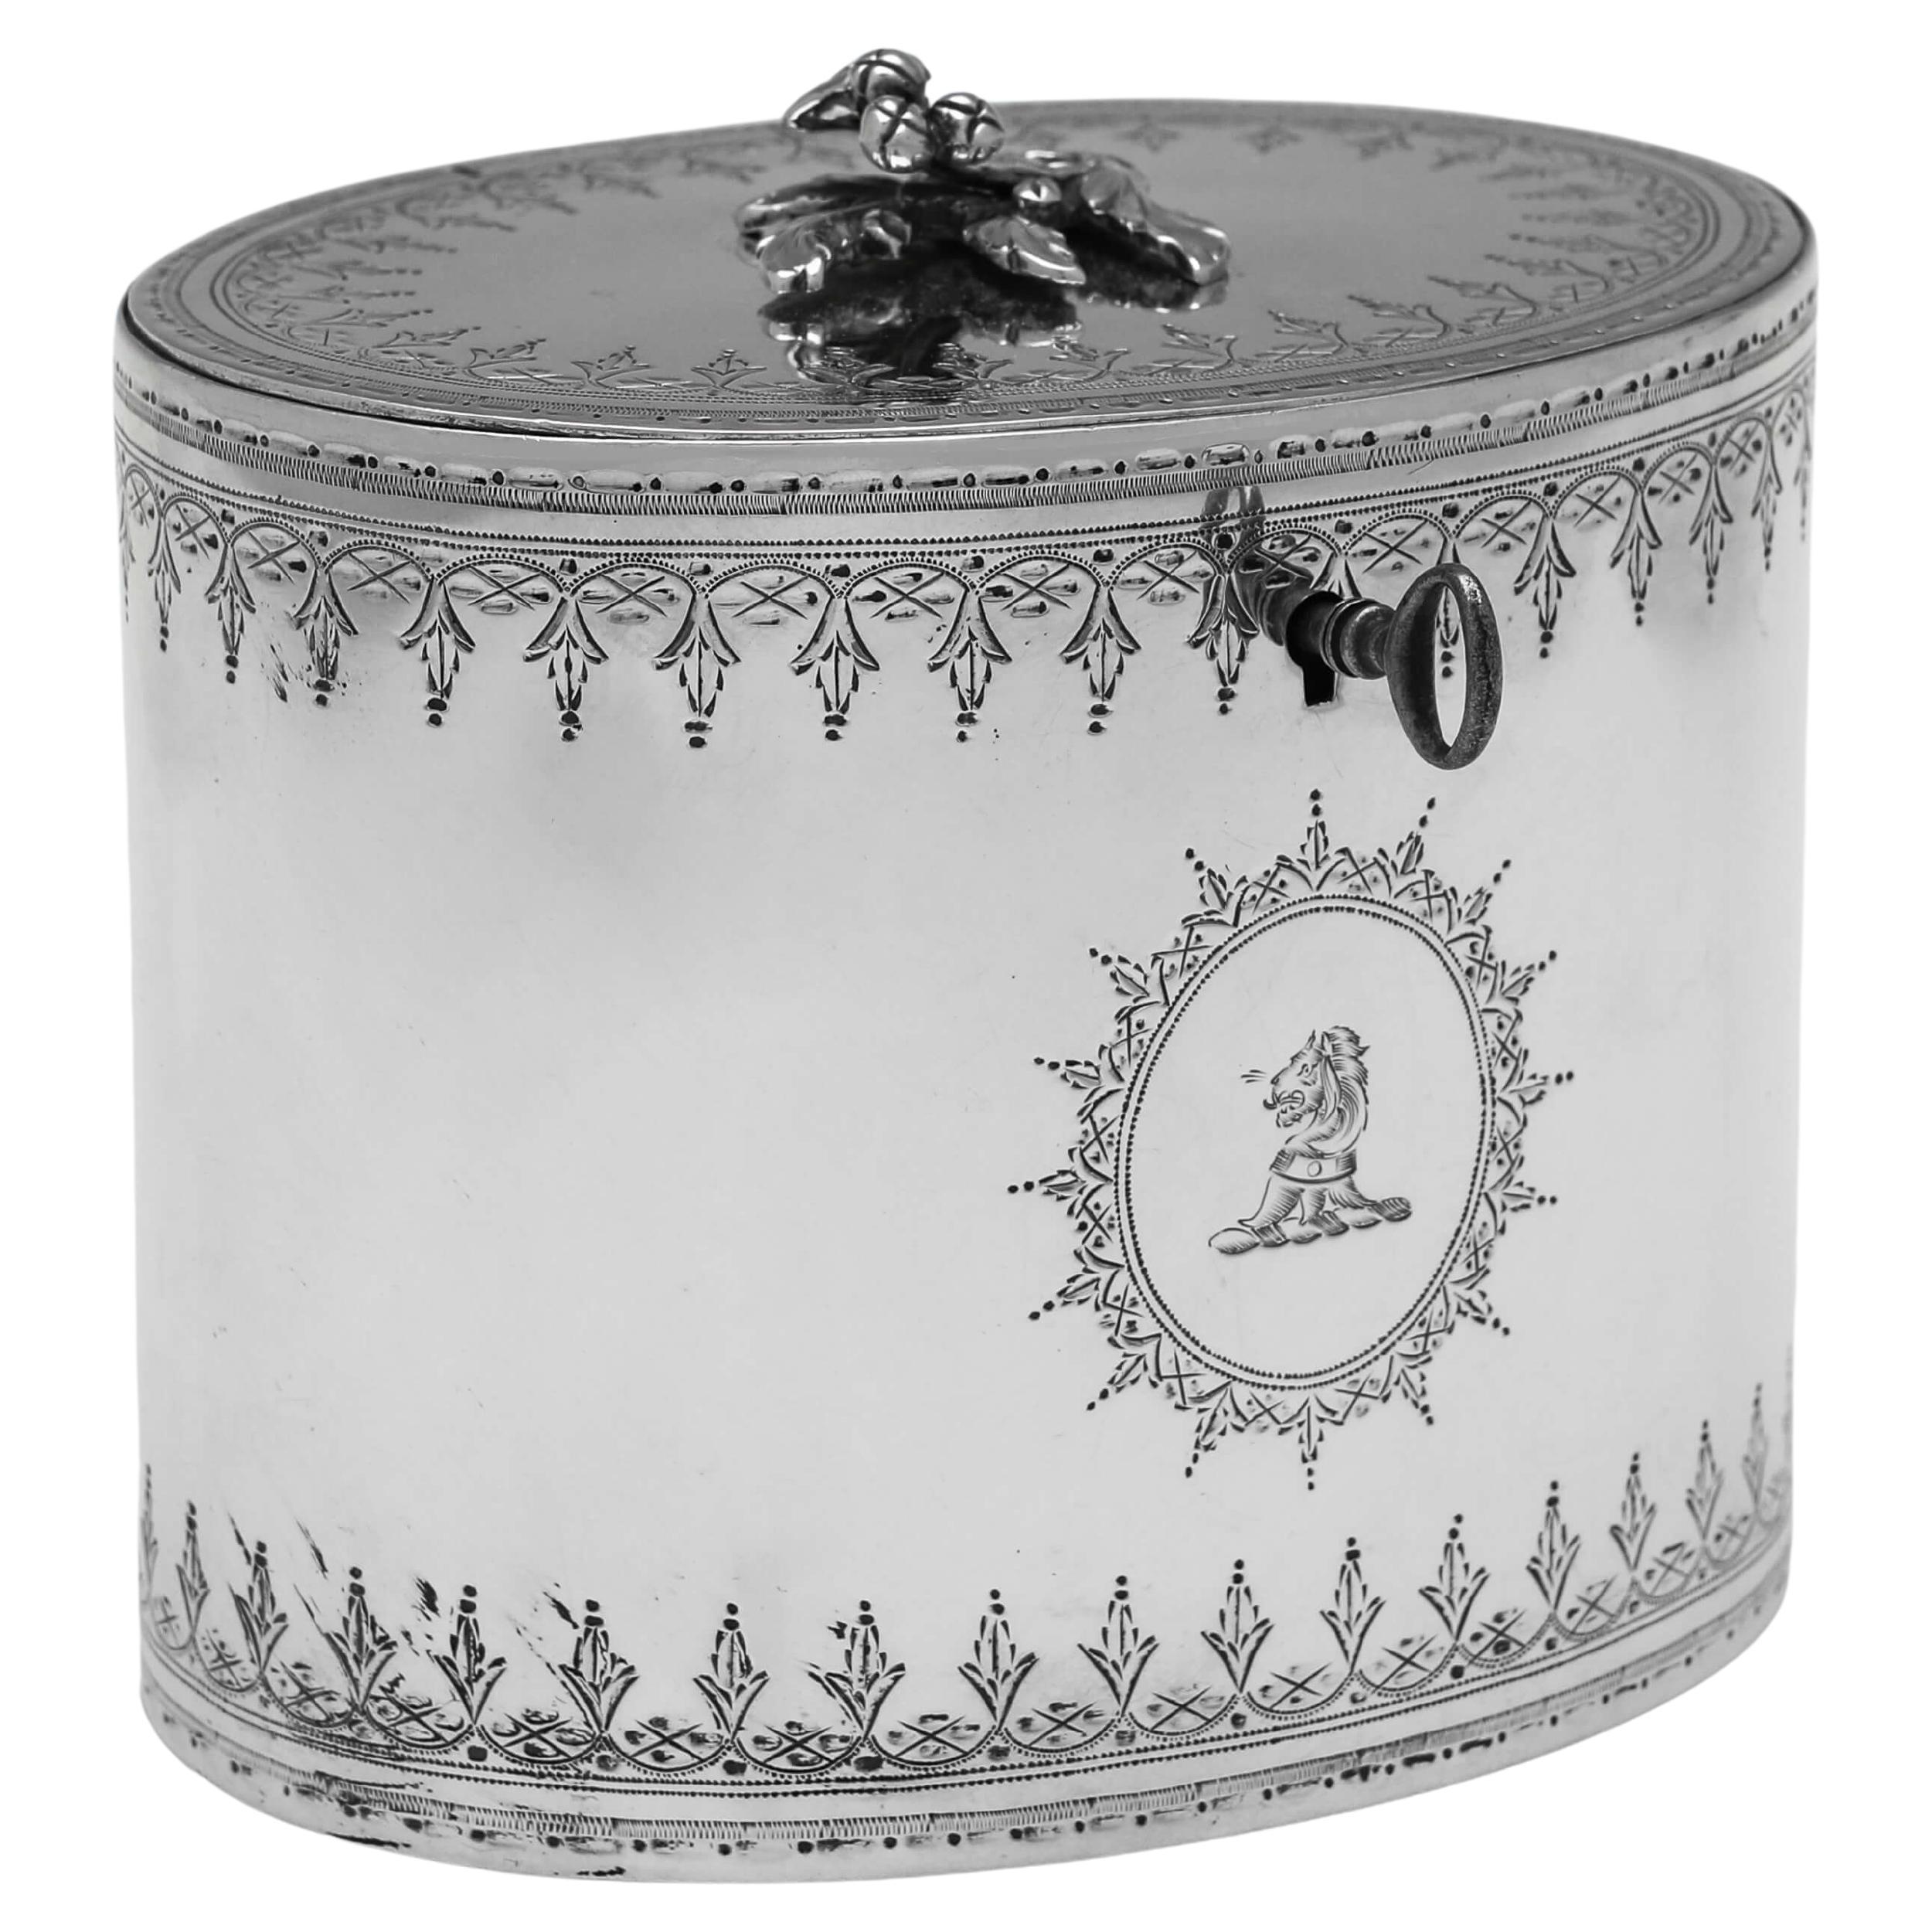 Stunning Engraved Neoclassical Antique Sterling Silver Tea Caddy - London 1806